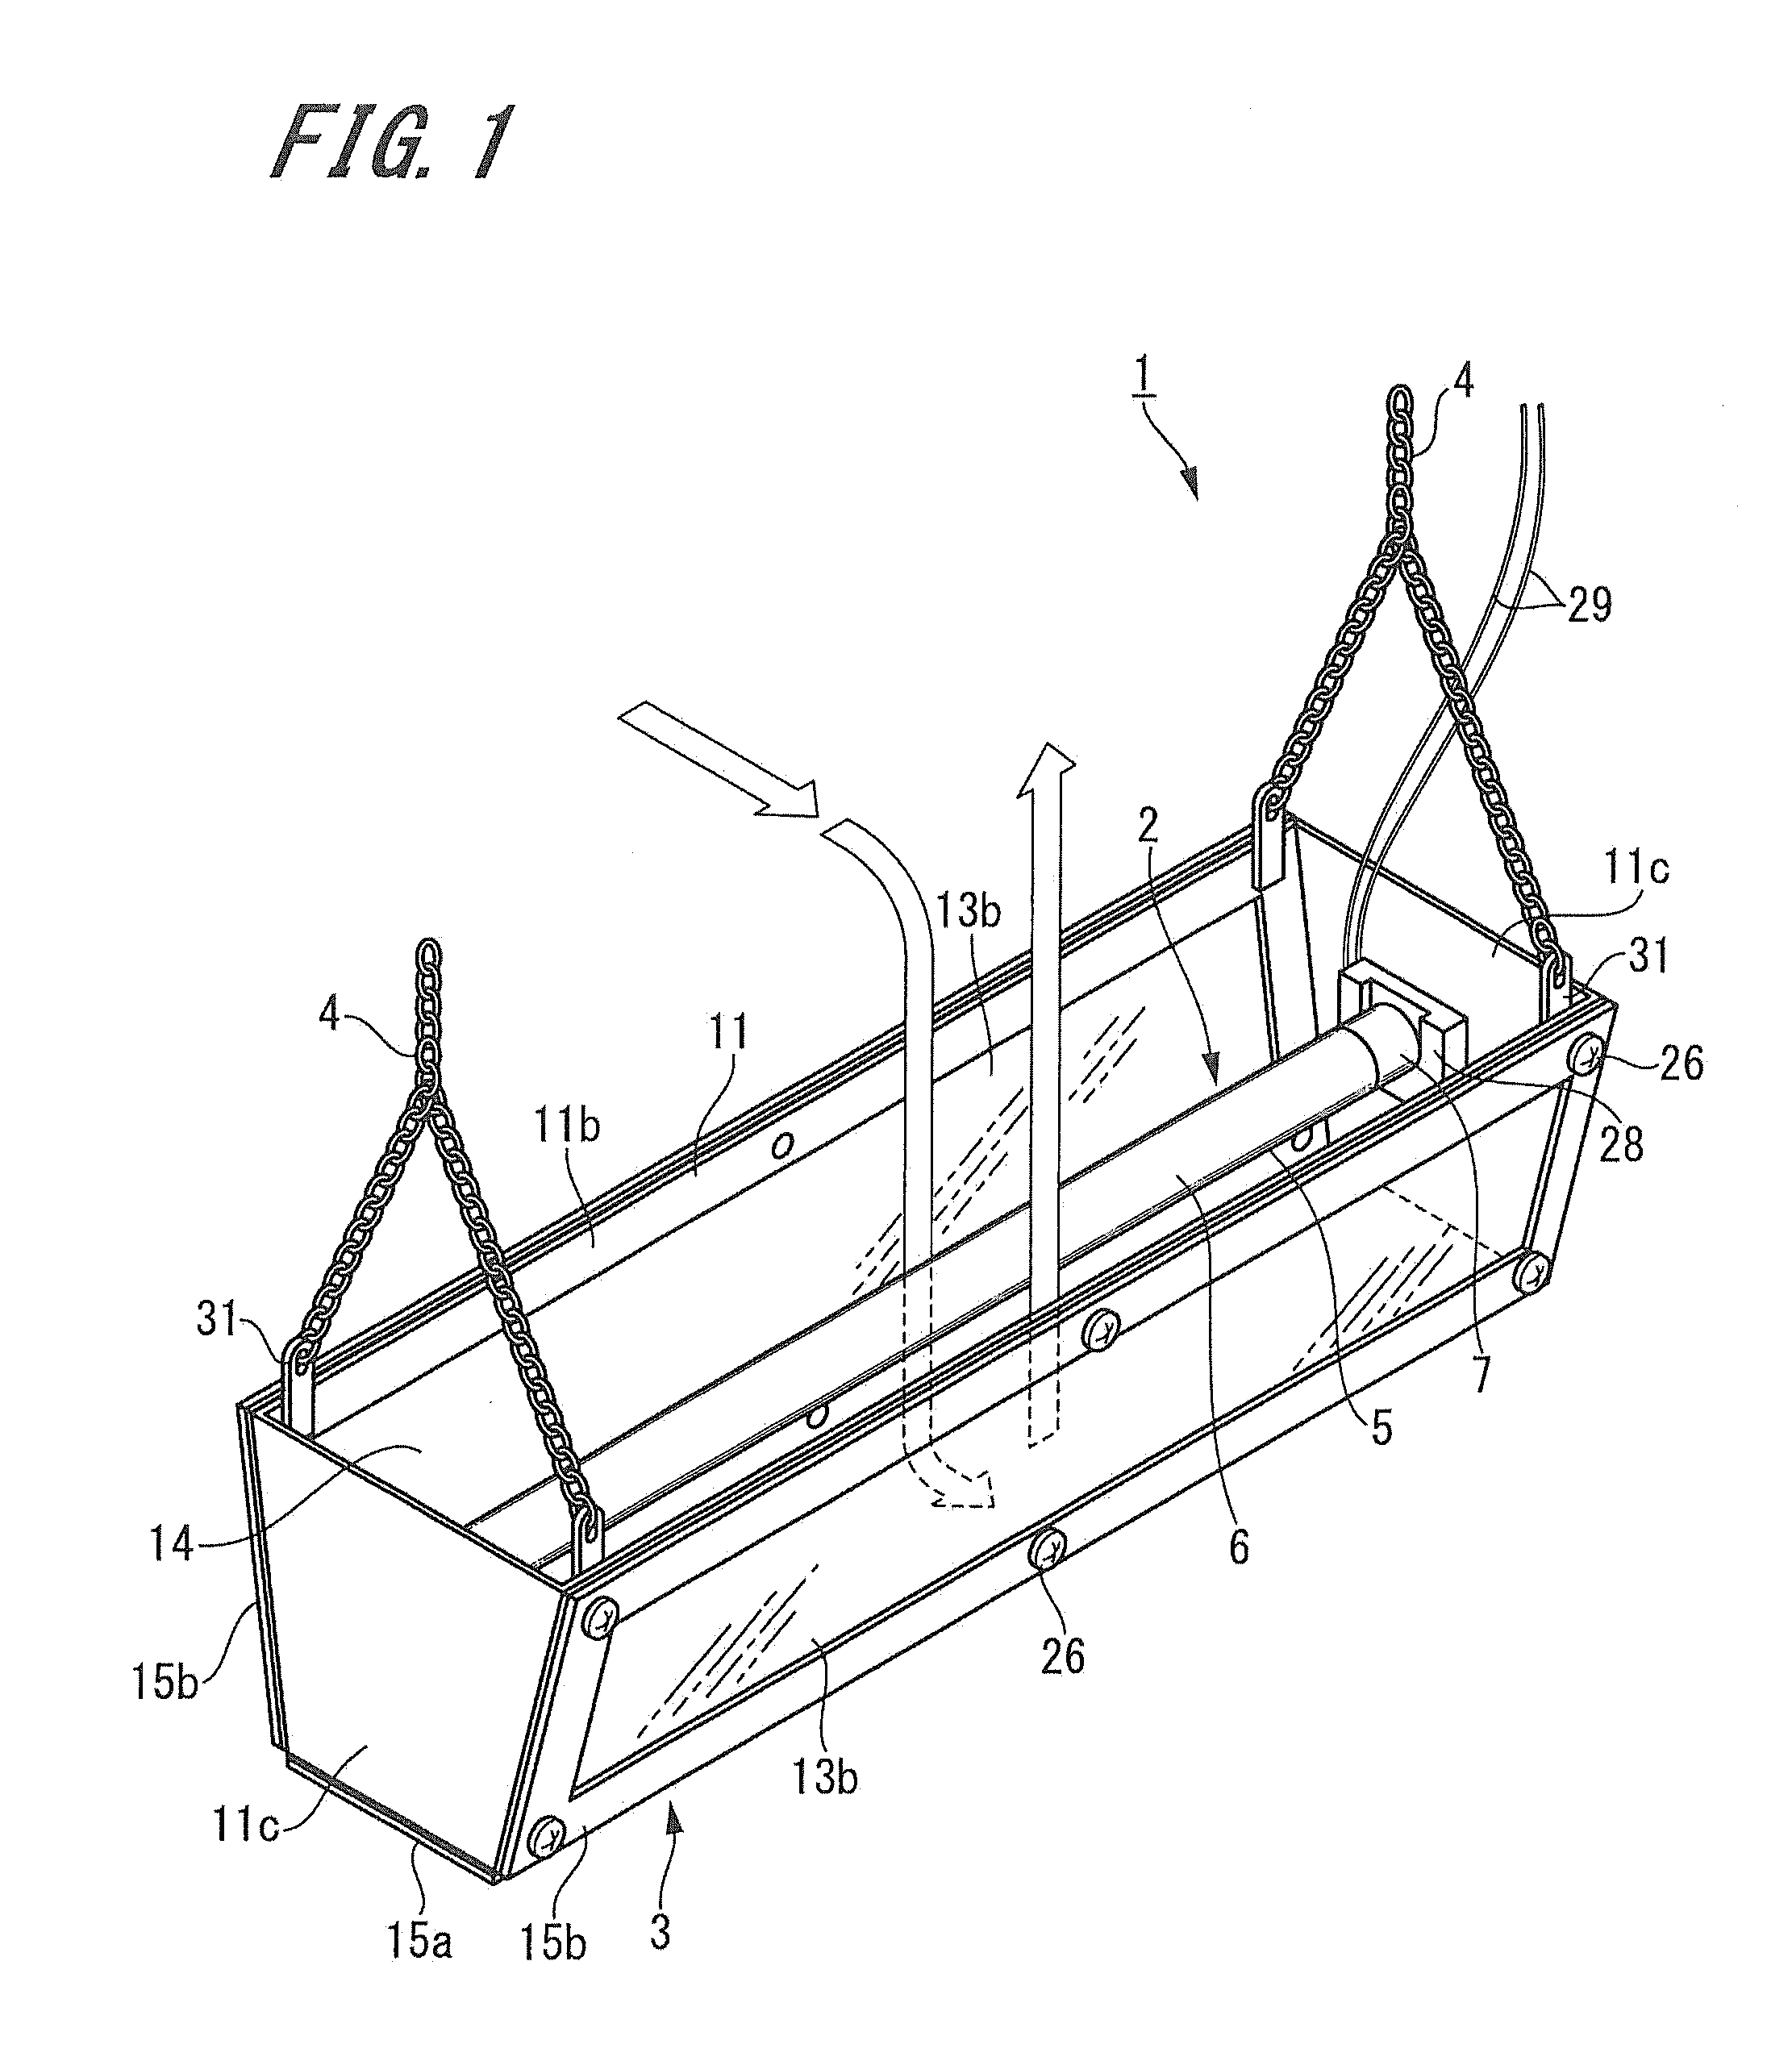 Lighting and air cleaning device